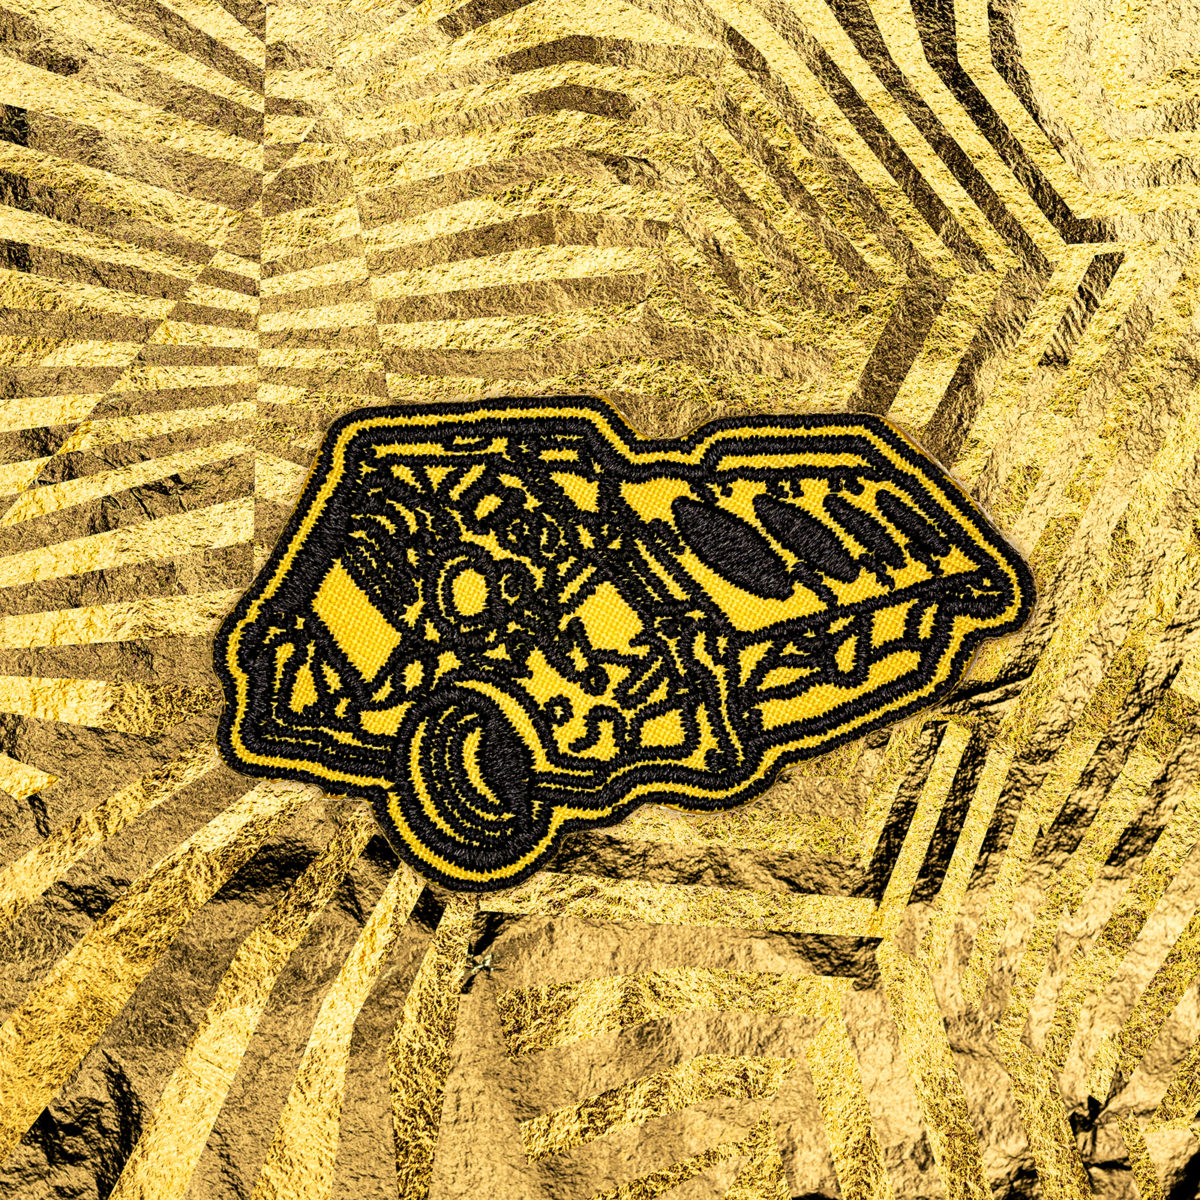 A picture of a fabric patch of a gold engine block.